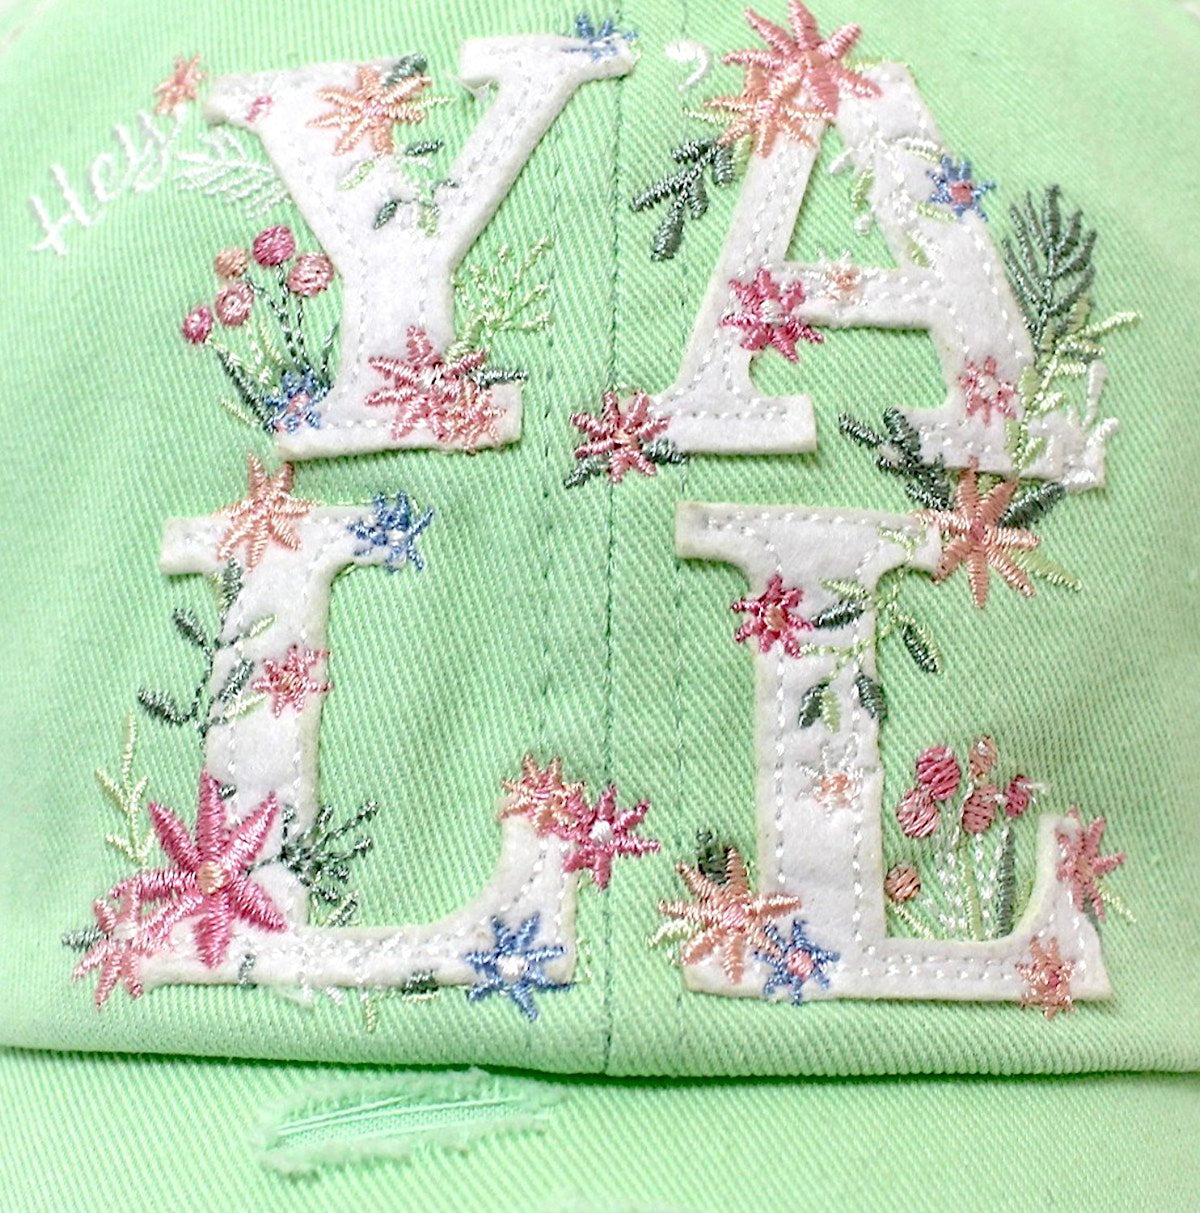 LILAC & FRESH MINT GREEN Women's Hey Y'all Spring Floral Cap - Caps 'N Vintage 